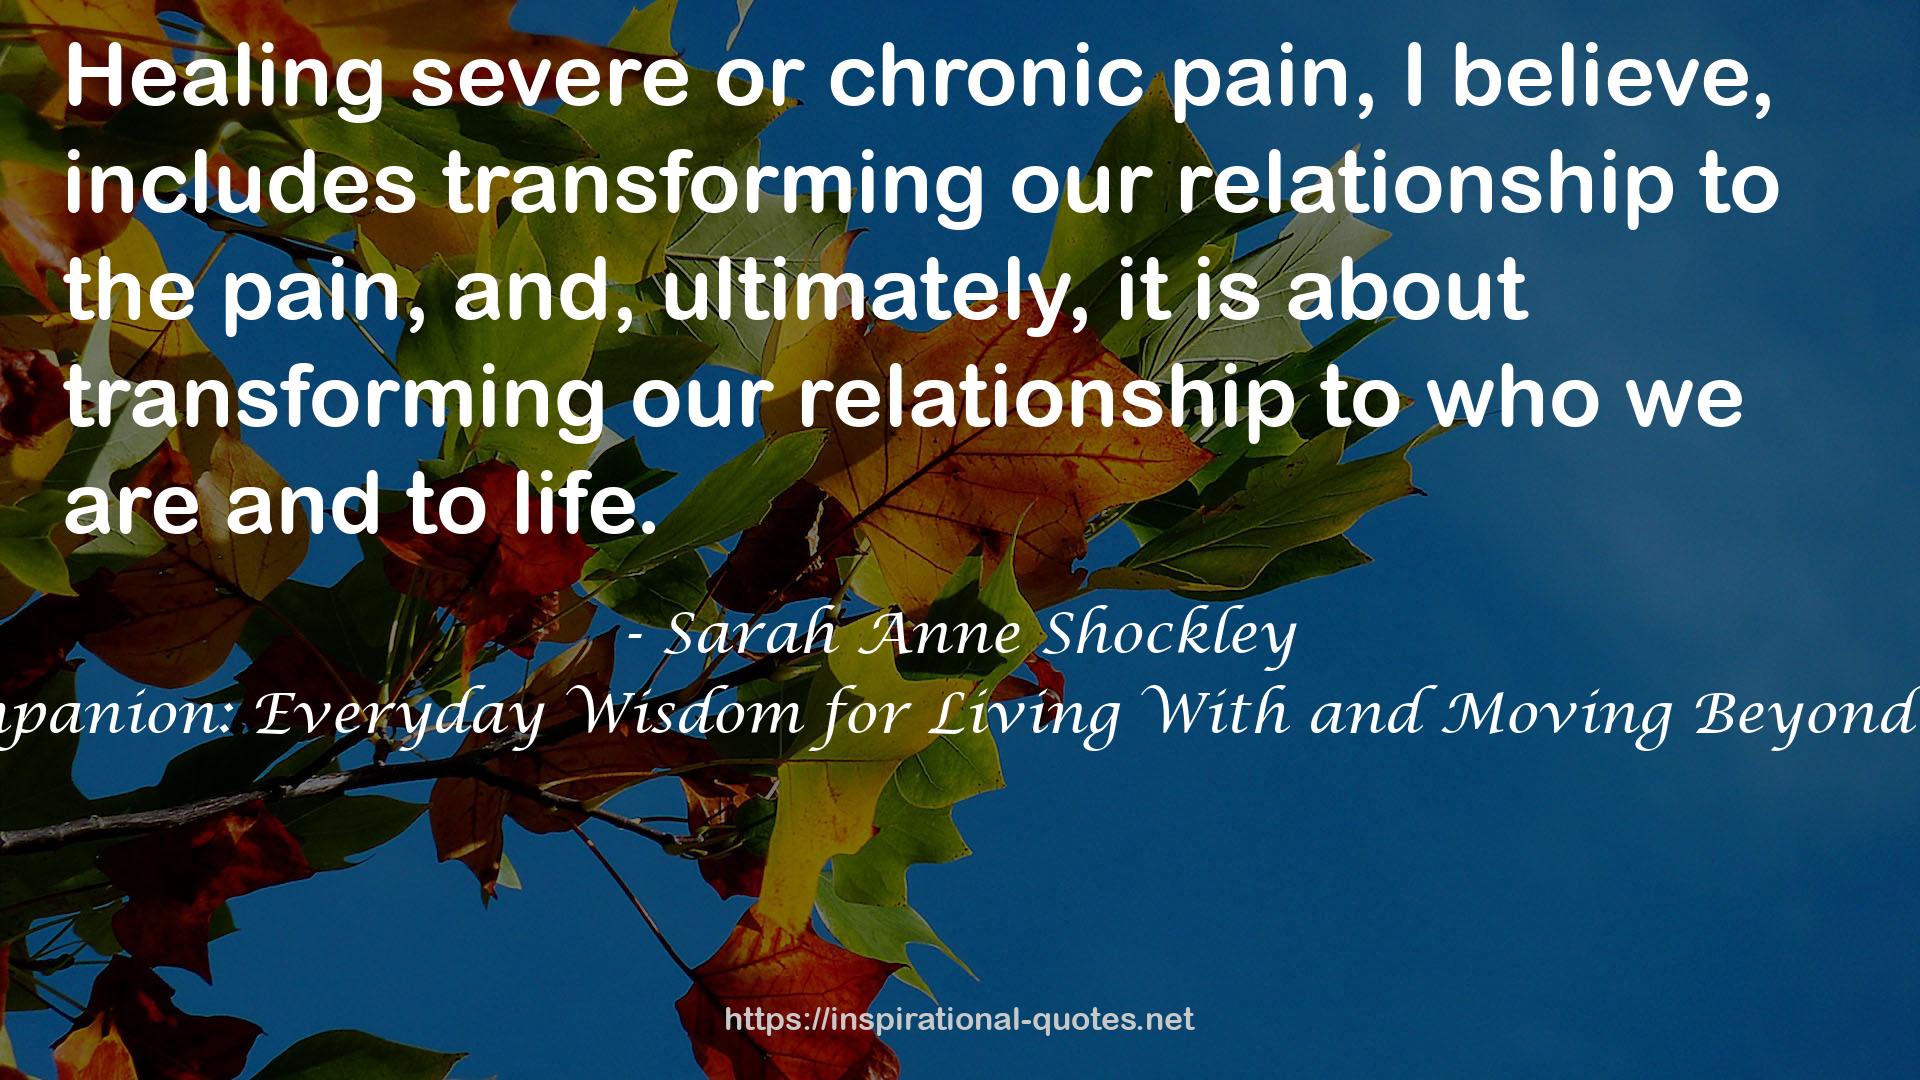 Sarah Anne Shockley QUOTES